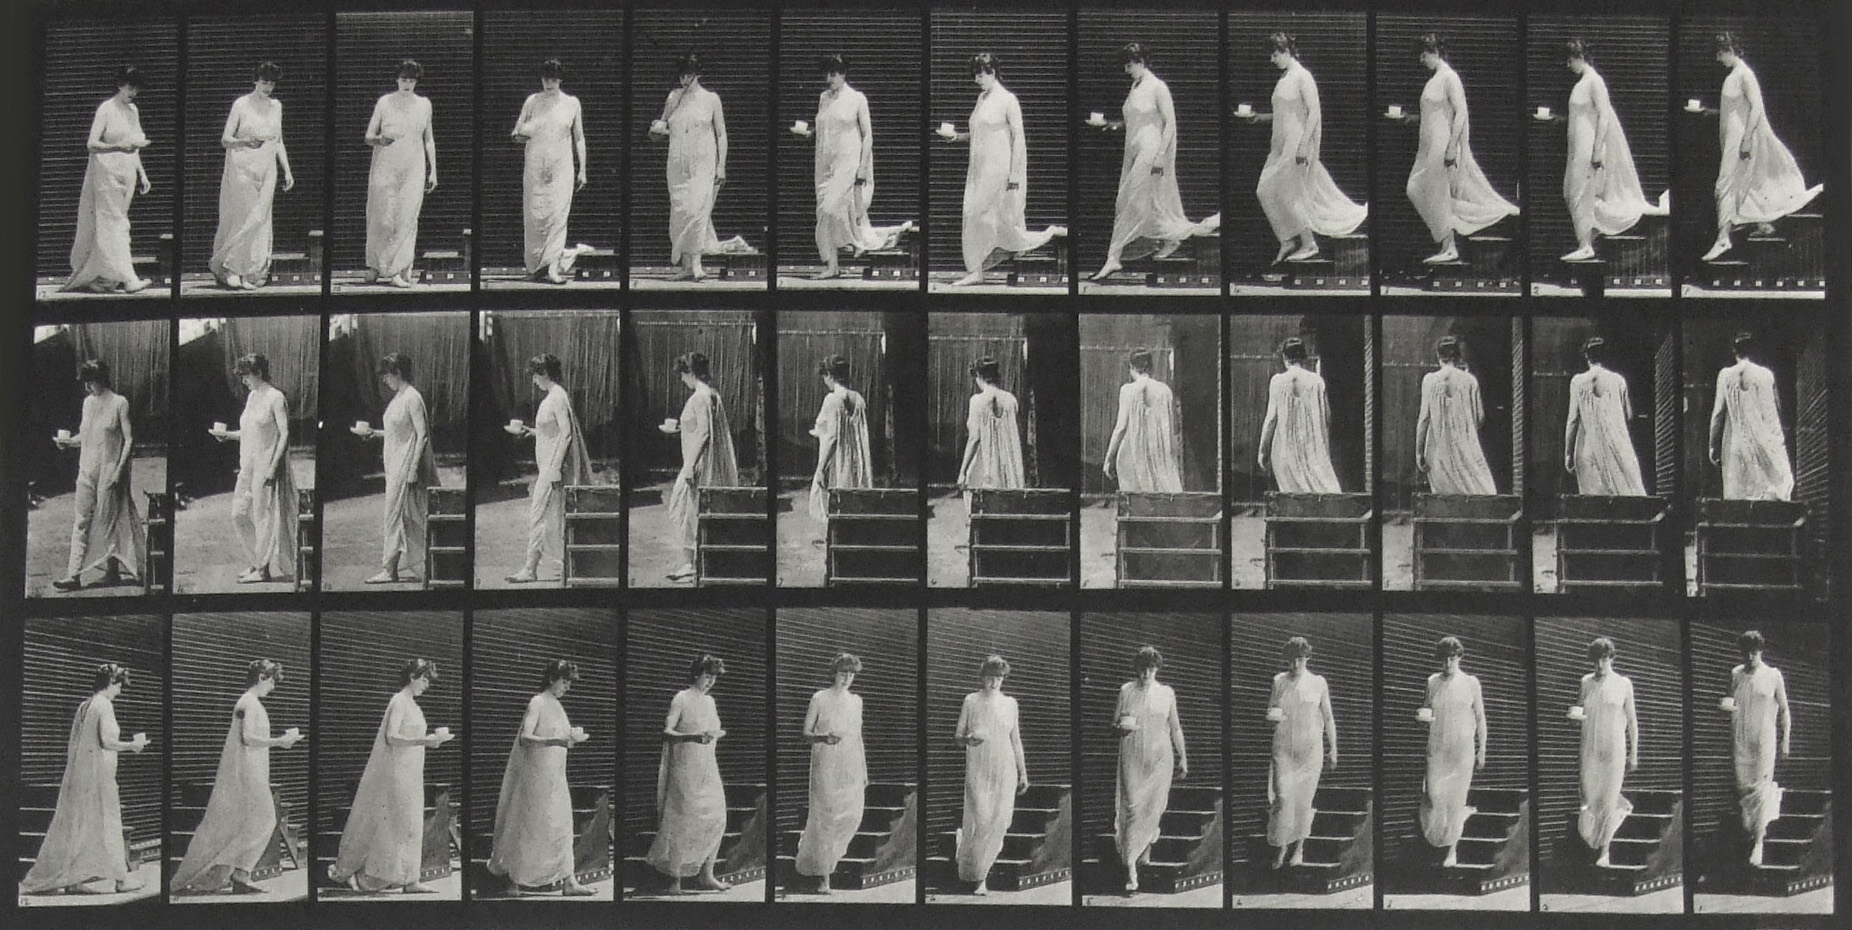 Eadweard Muybridge, Descending stairs, turning, cup and saucer in right hand, from the series <i>Animal Locomotion</i>, 1887. Eli and Edythe Broad Art Museum, Michigan State University, MSU purchase.